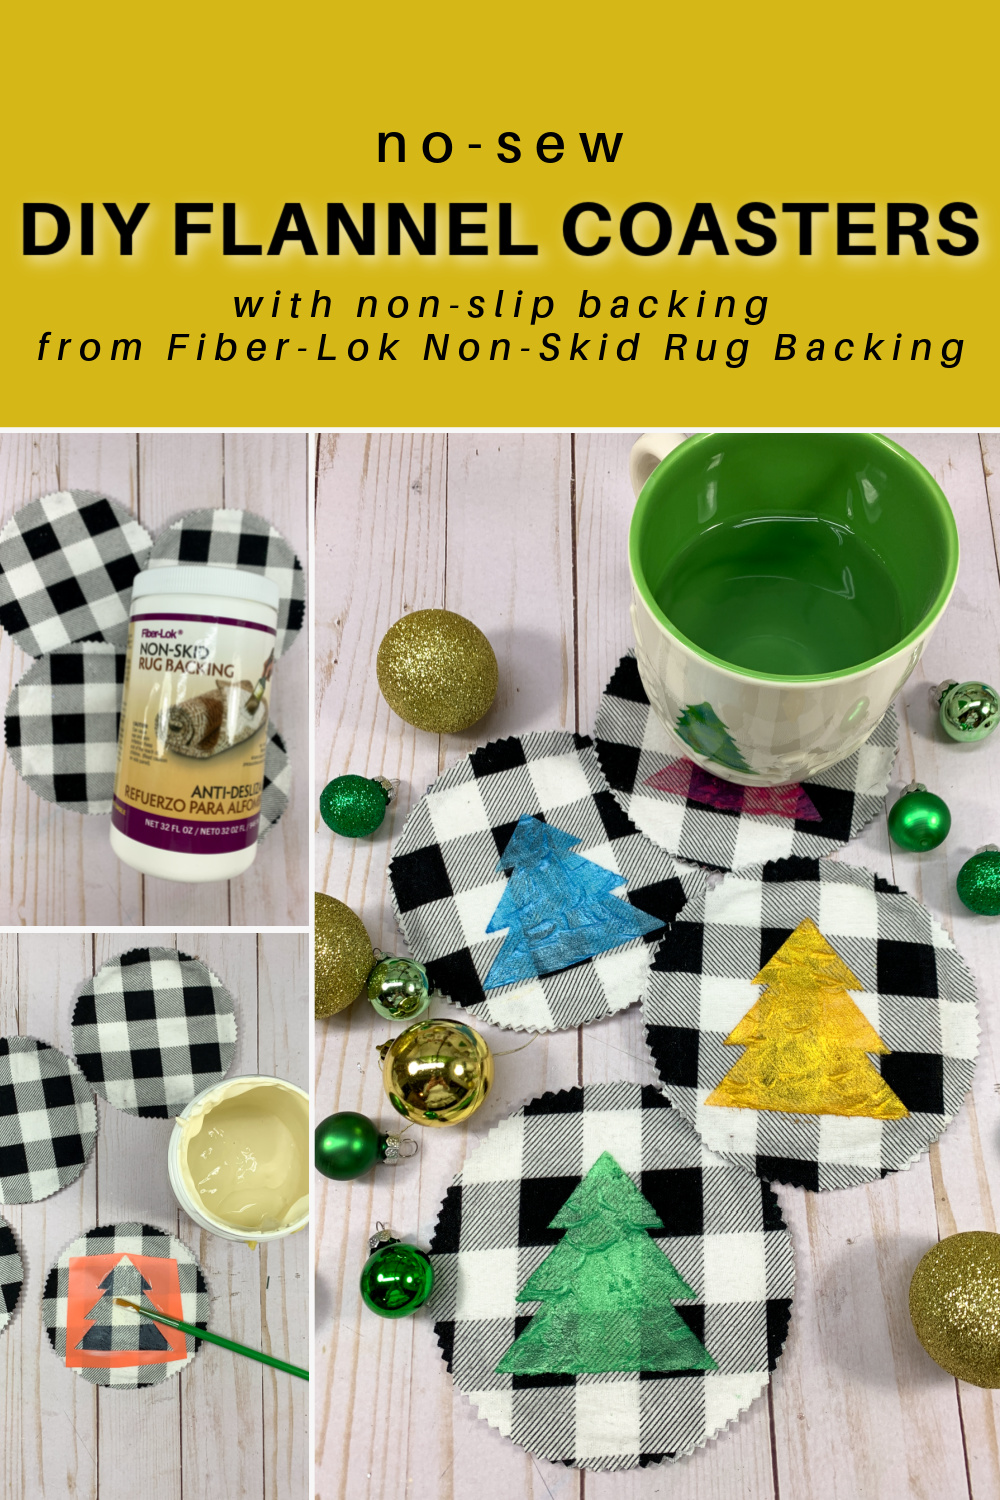 These no-sew flannel coasters are so easy and fun to make! Add a no-slip backing in fun shapes and colors, or totally clear, with Fiber-Lok Non-Skid Rug Backing. via @resincraftsblog